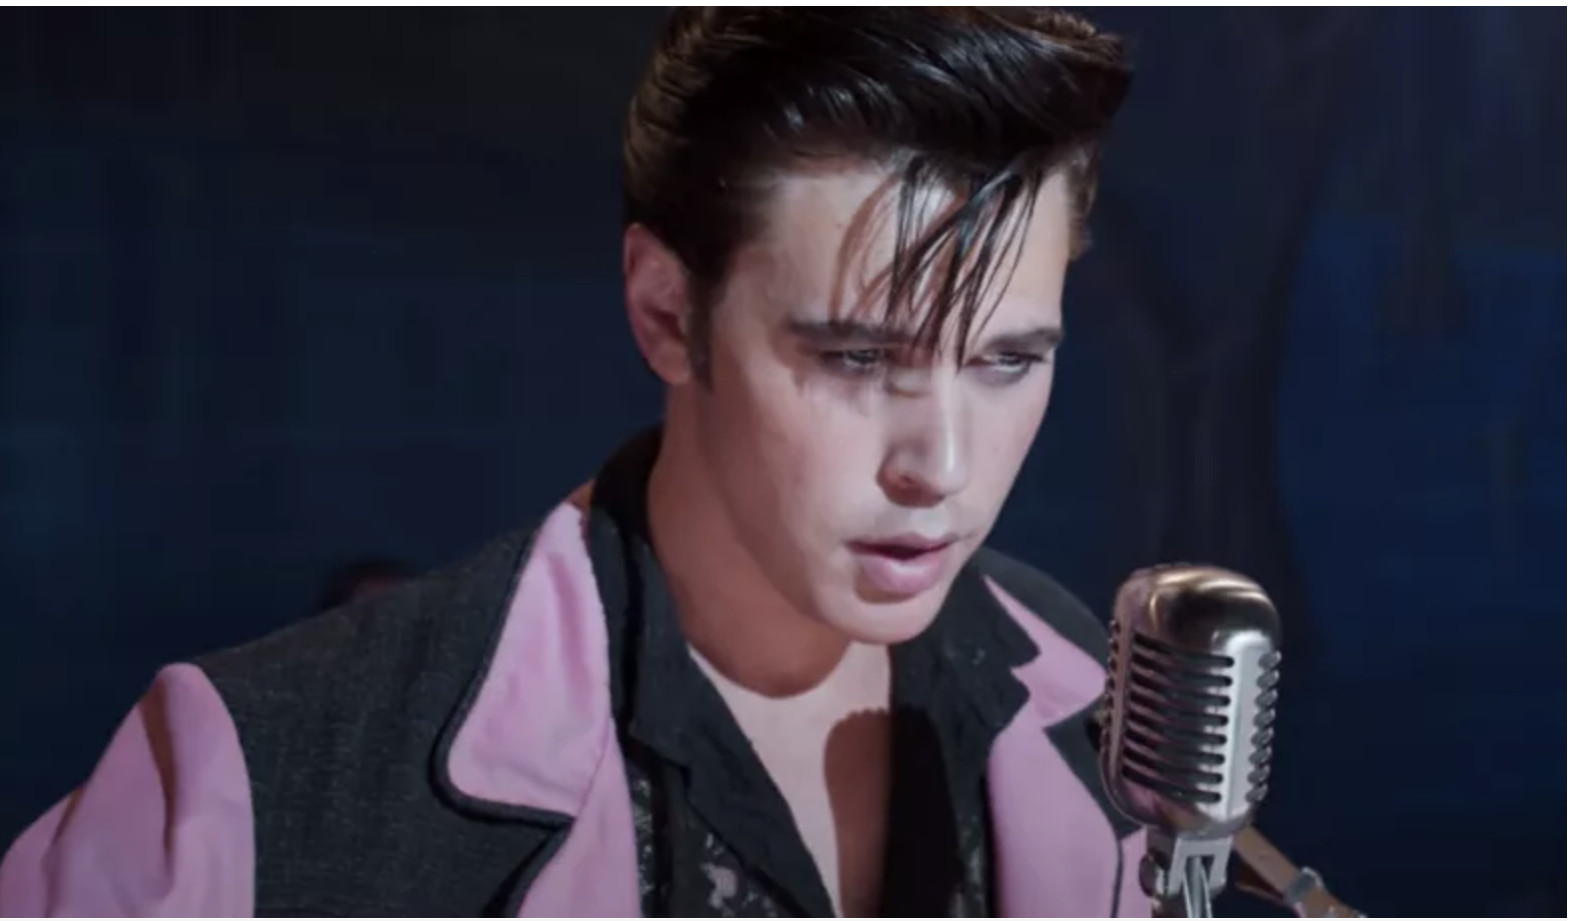 Elvis (and his pelvis) are the focus in Baz Luhrmann's electrifying biopic